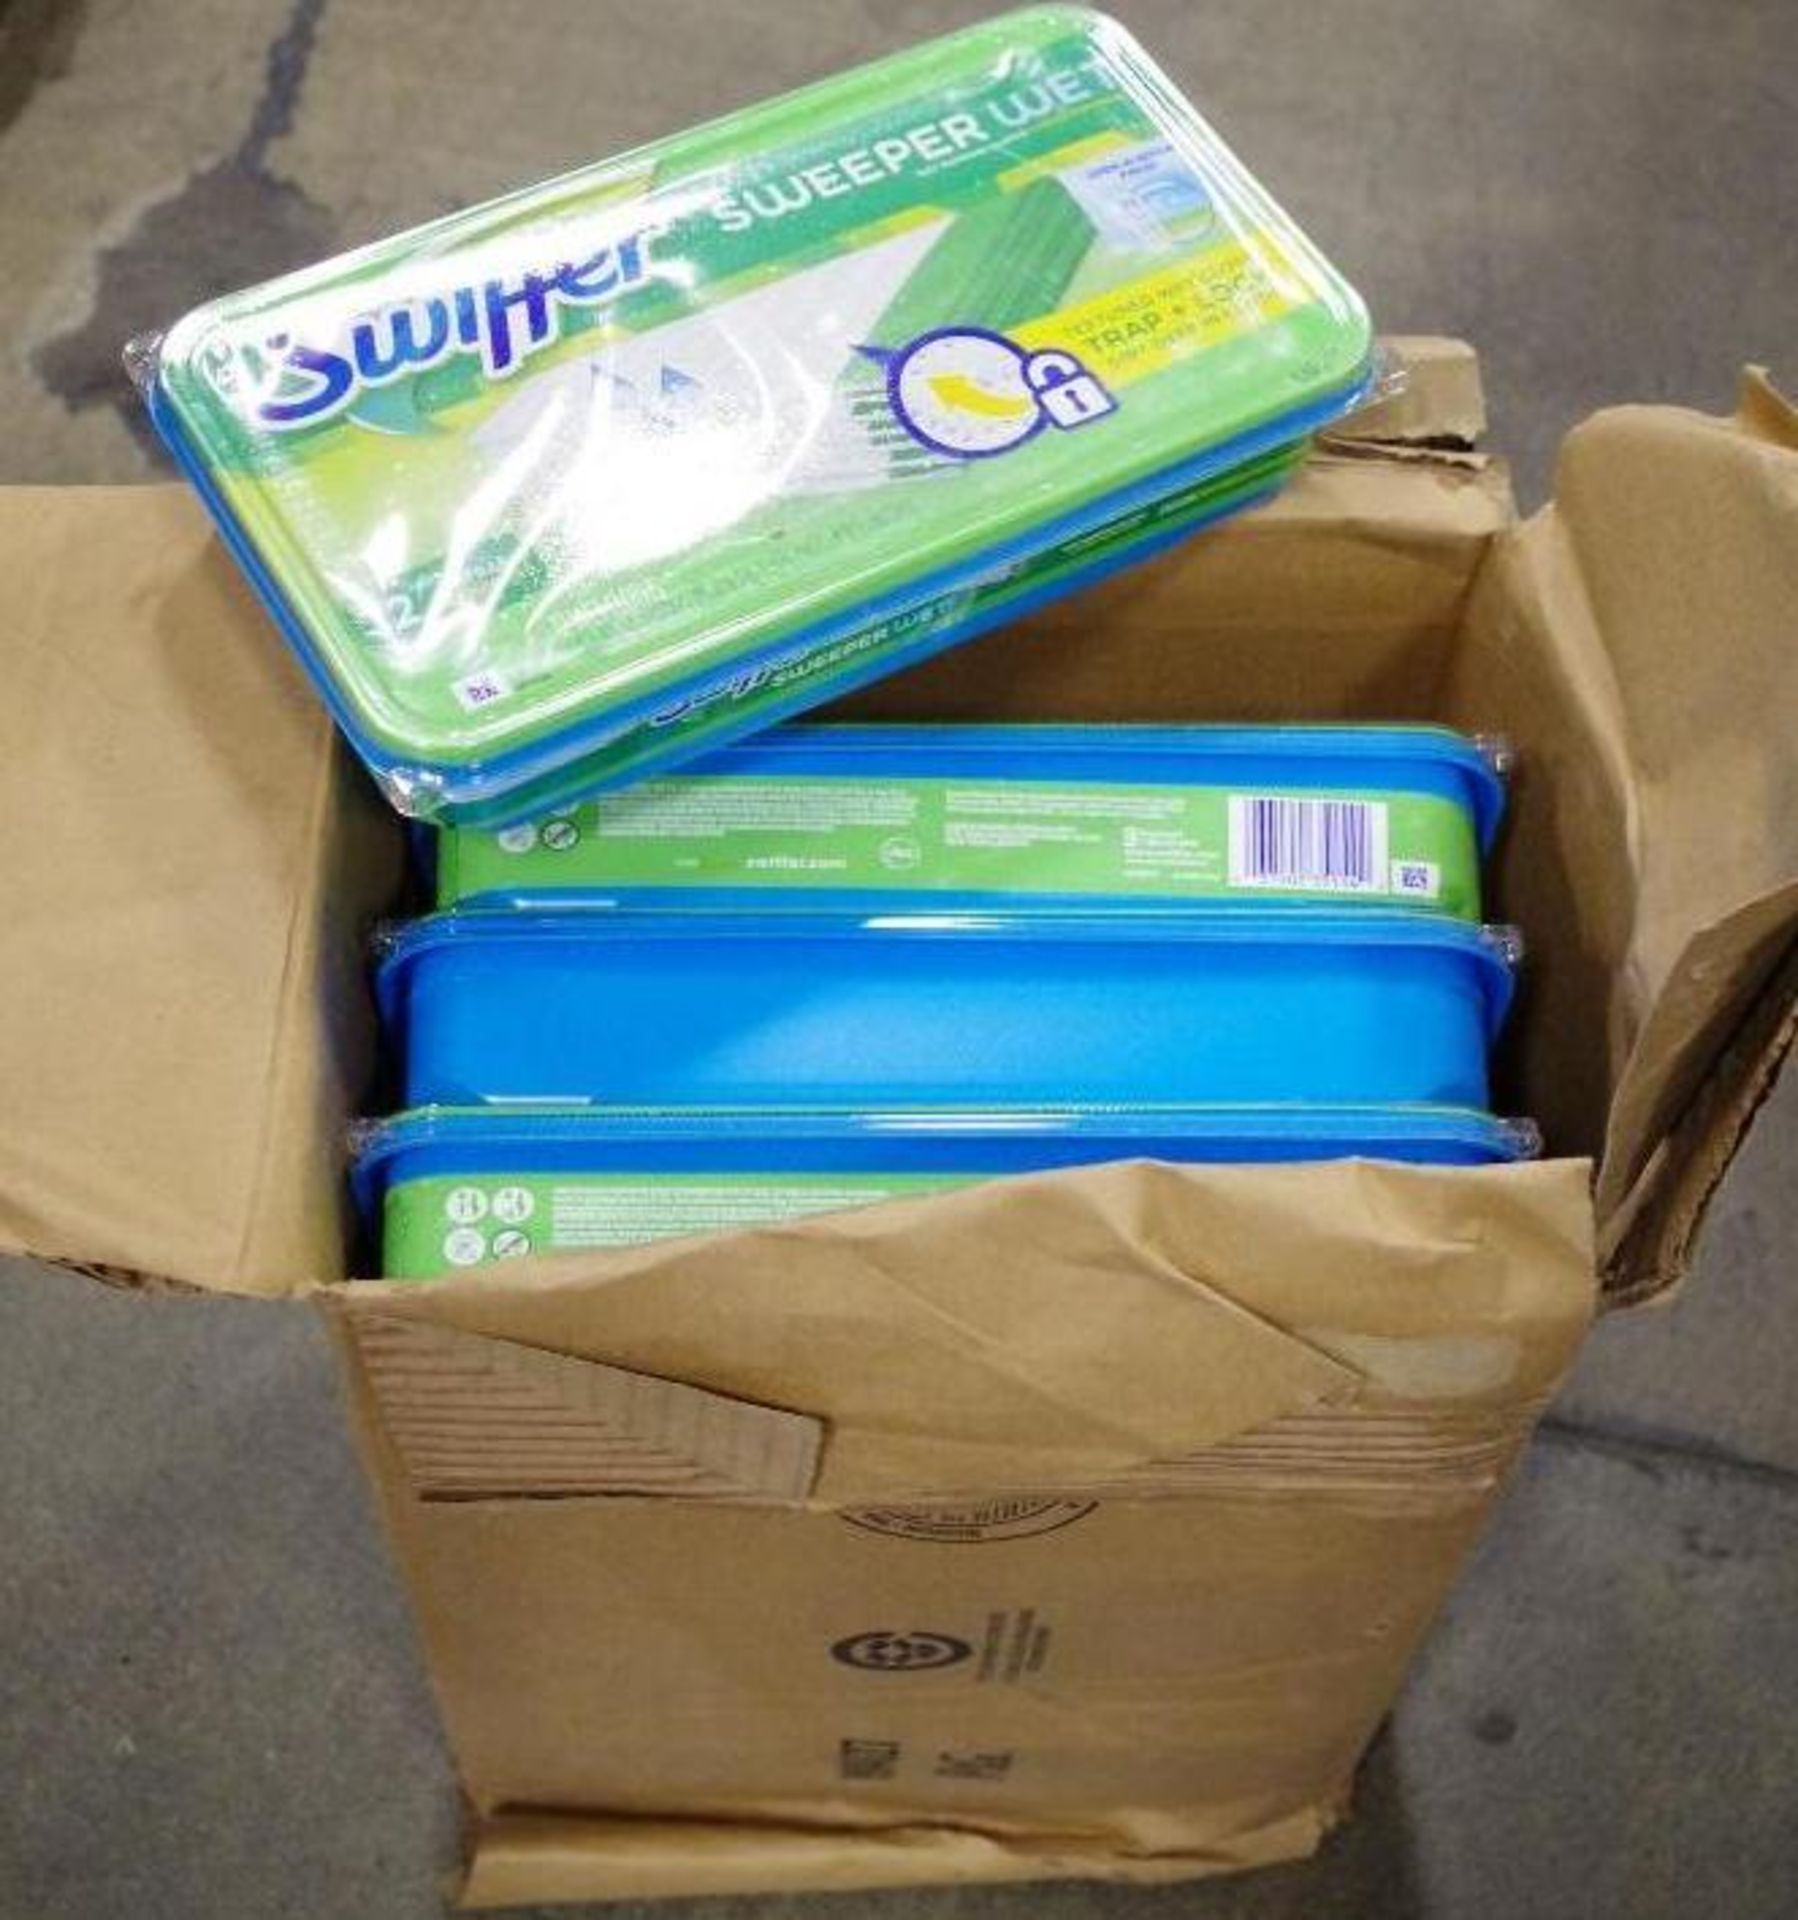 SWIFFER Wet Mopping Cloths (12 Boxes of 12 Cloths Each) - Image 3 of 3